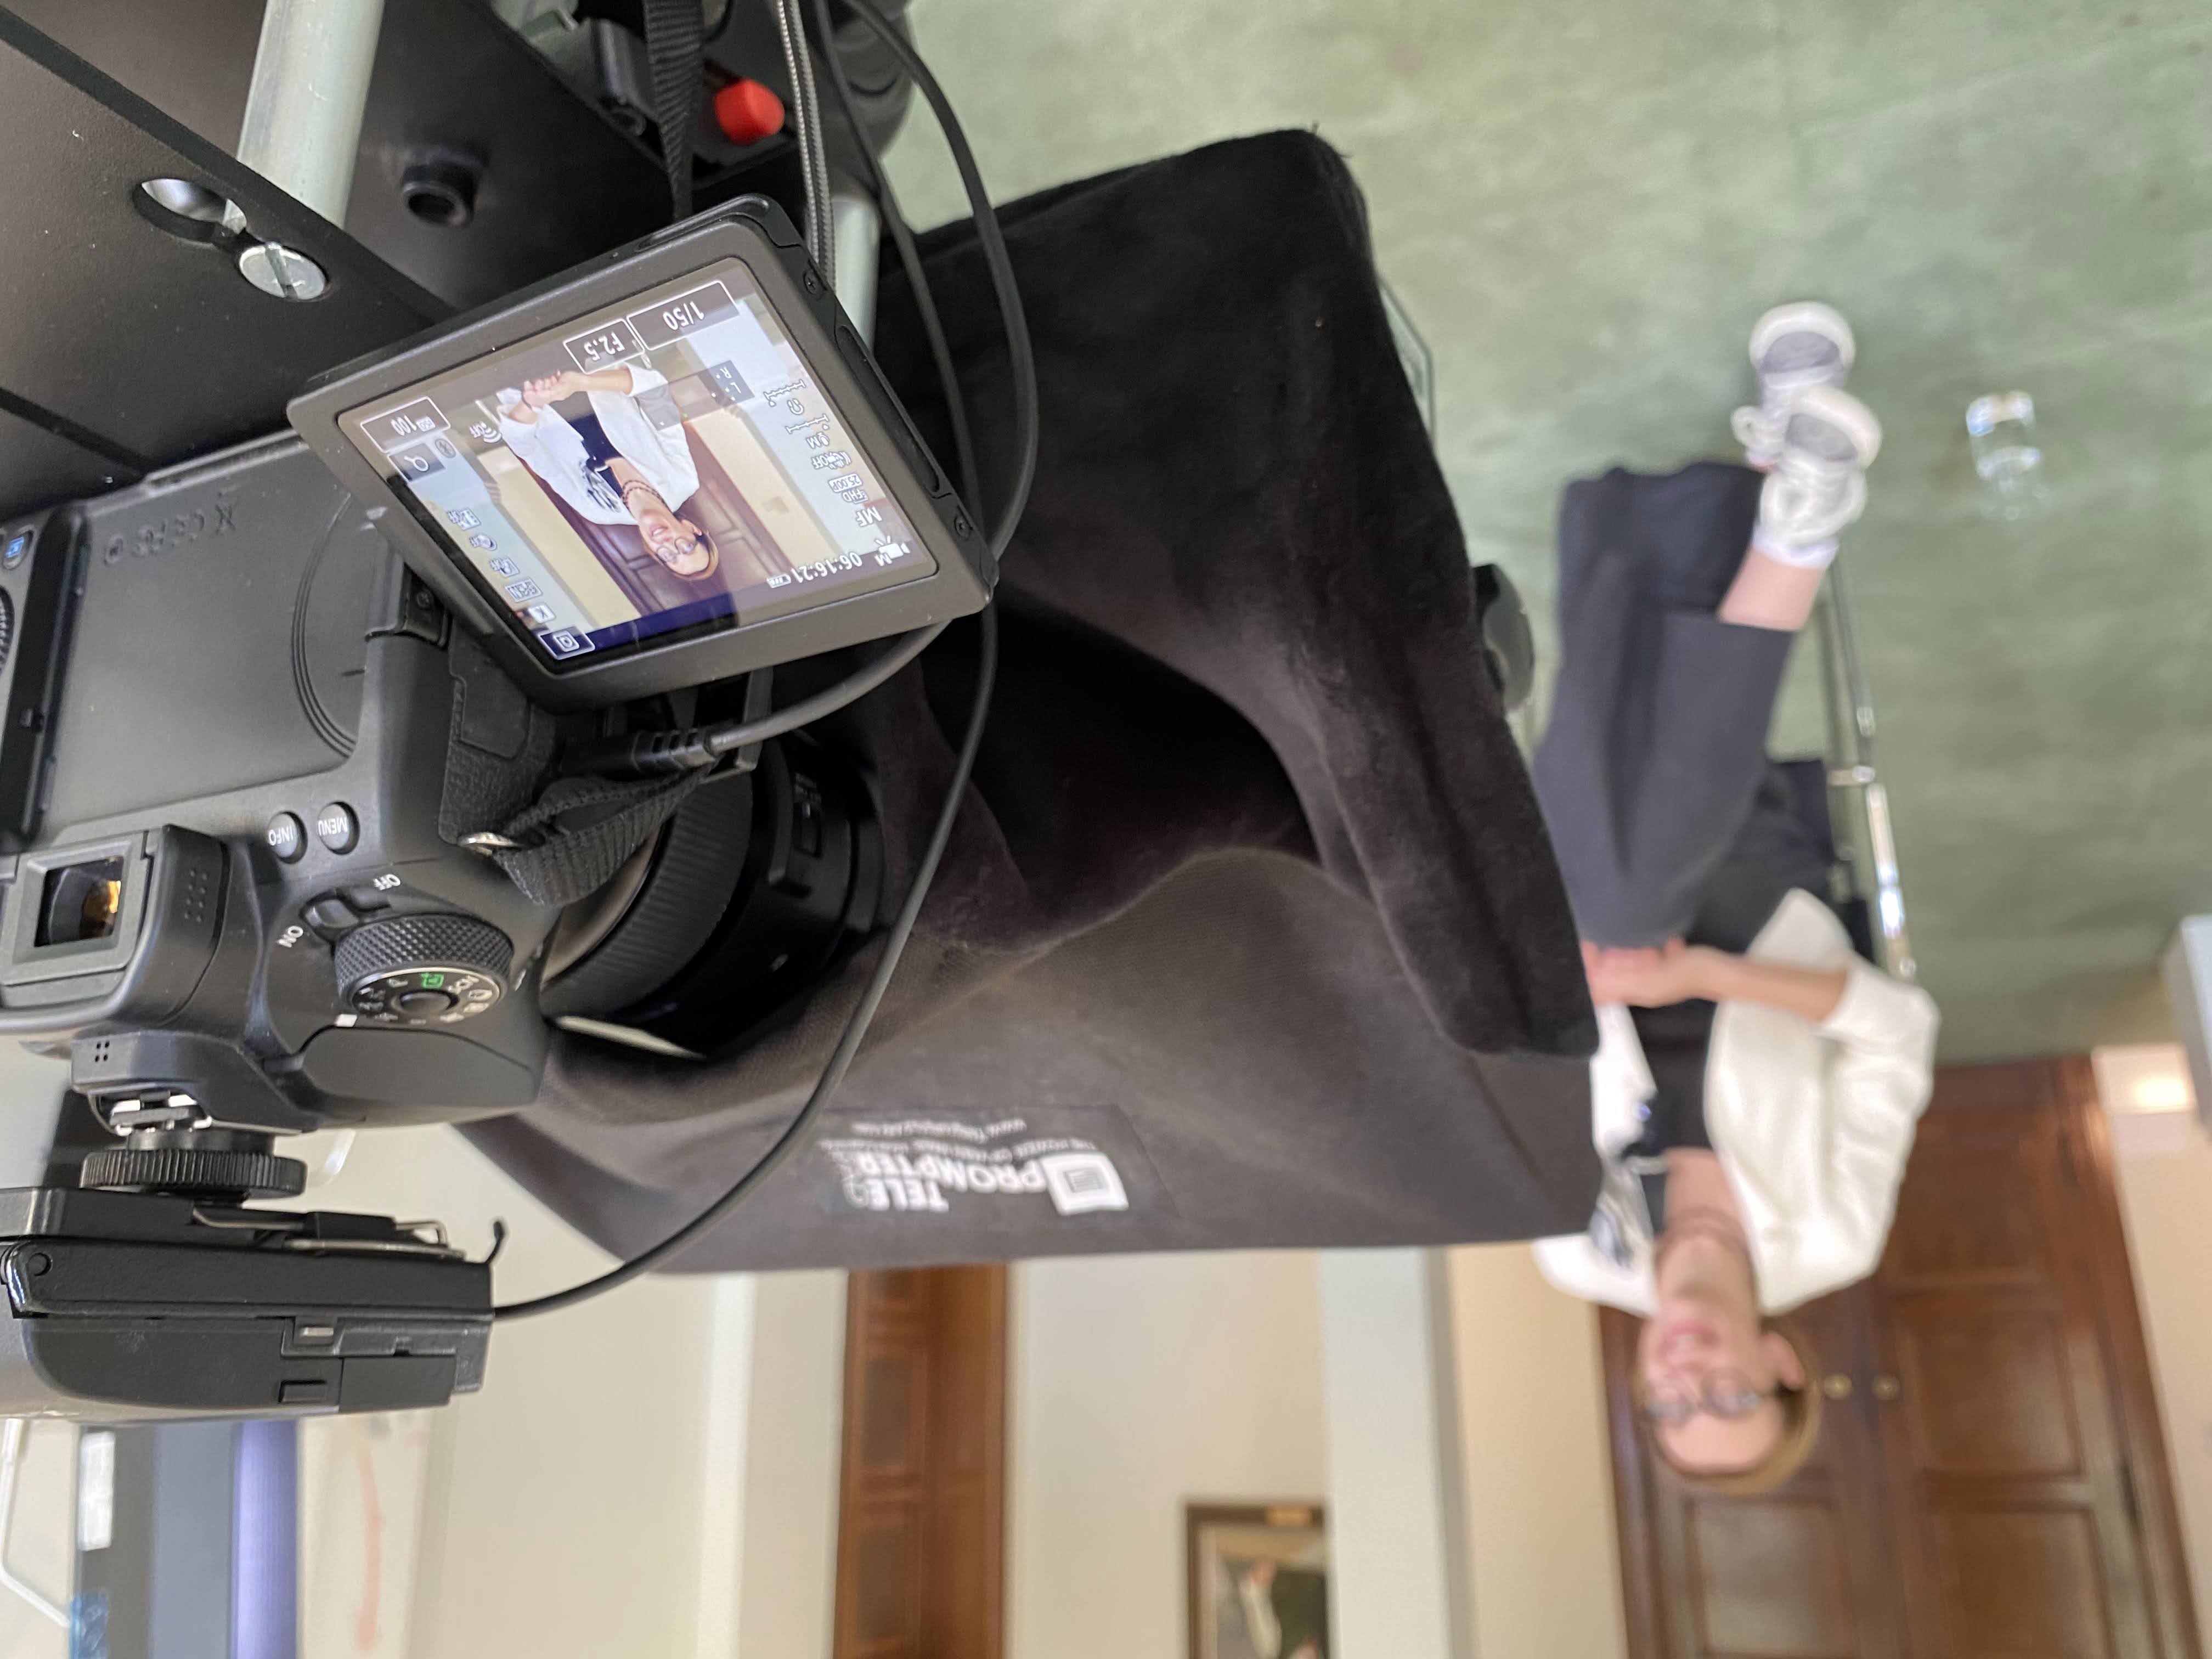 Anna Kwiatkowska, Deputy Director for Data Science at HM Revenue and Customs being filmed in a stately room. Camera, teleprompter and microphone in focus with the background slightly blurred.